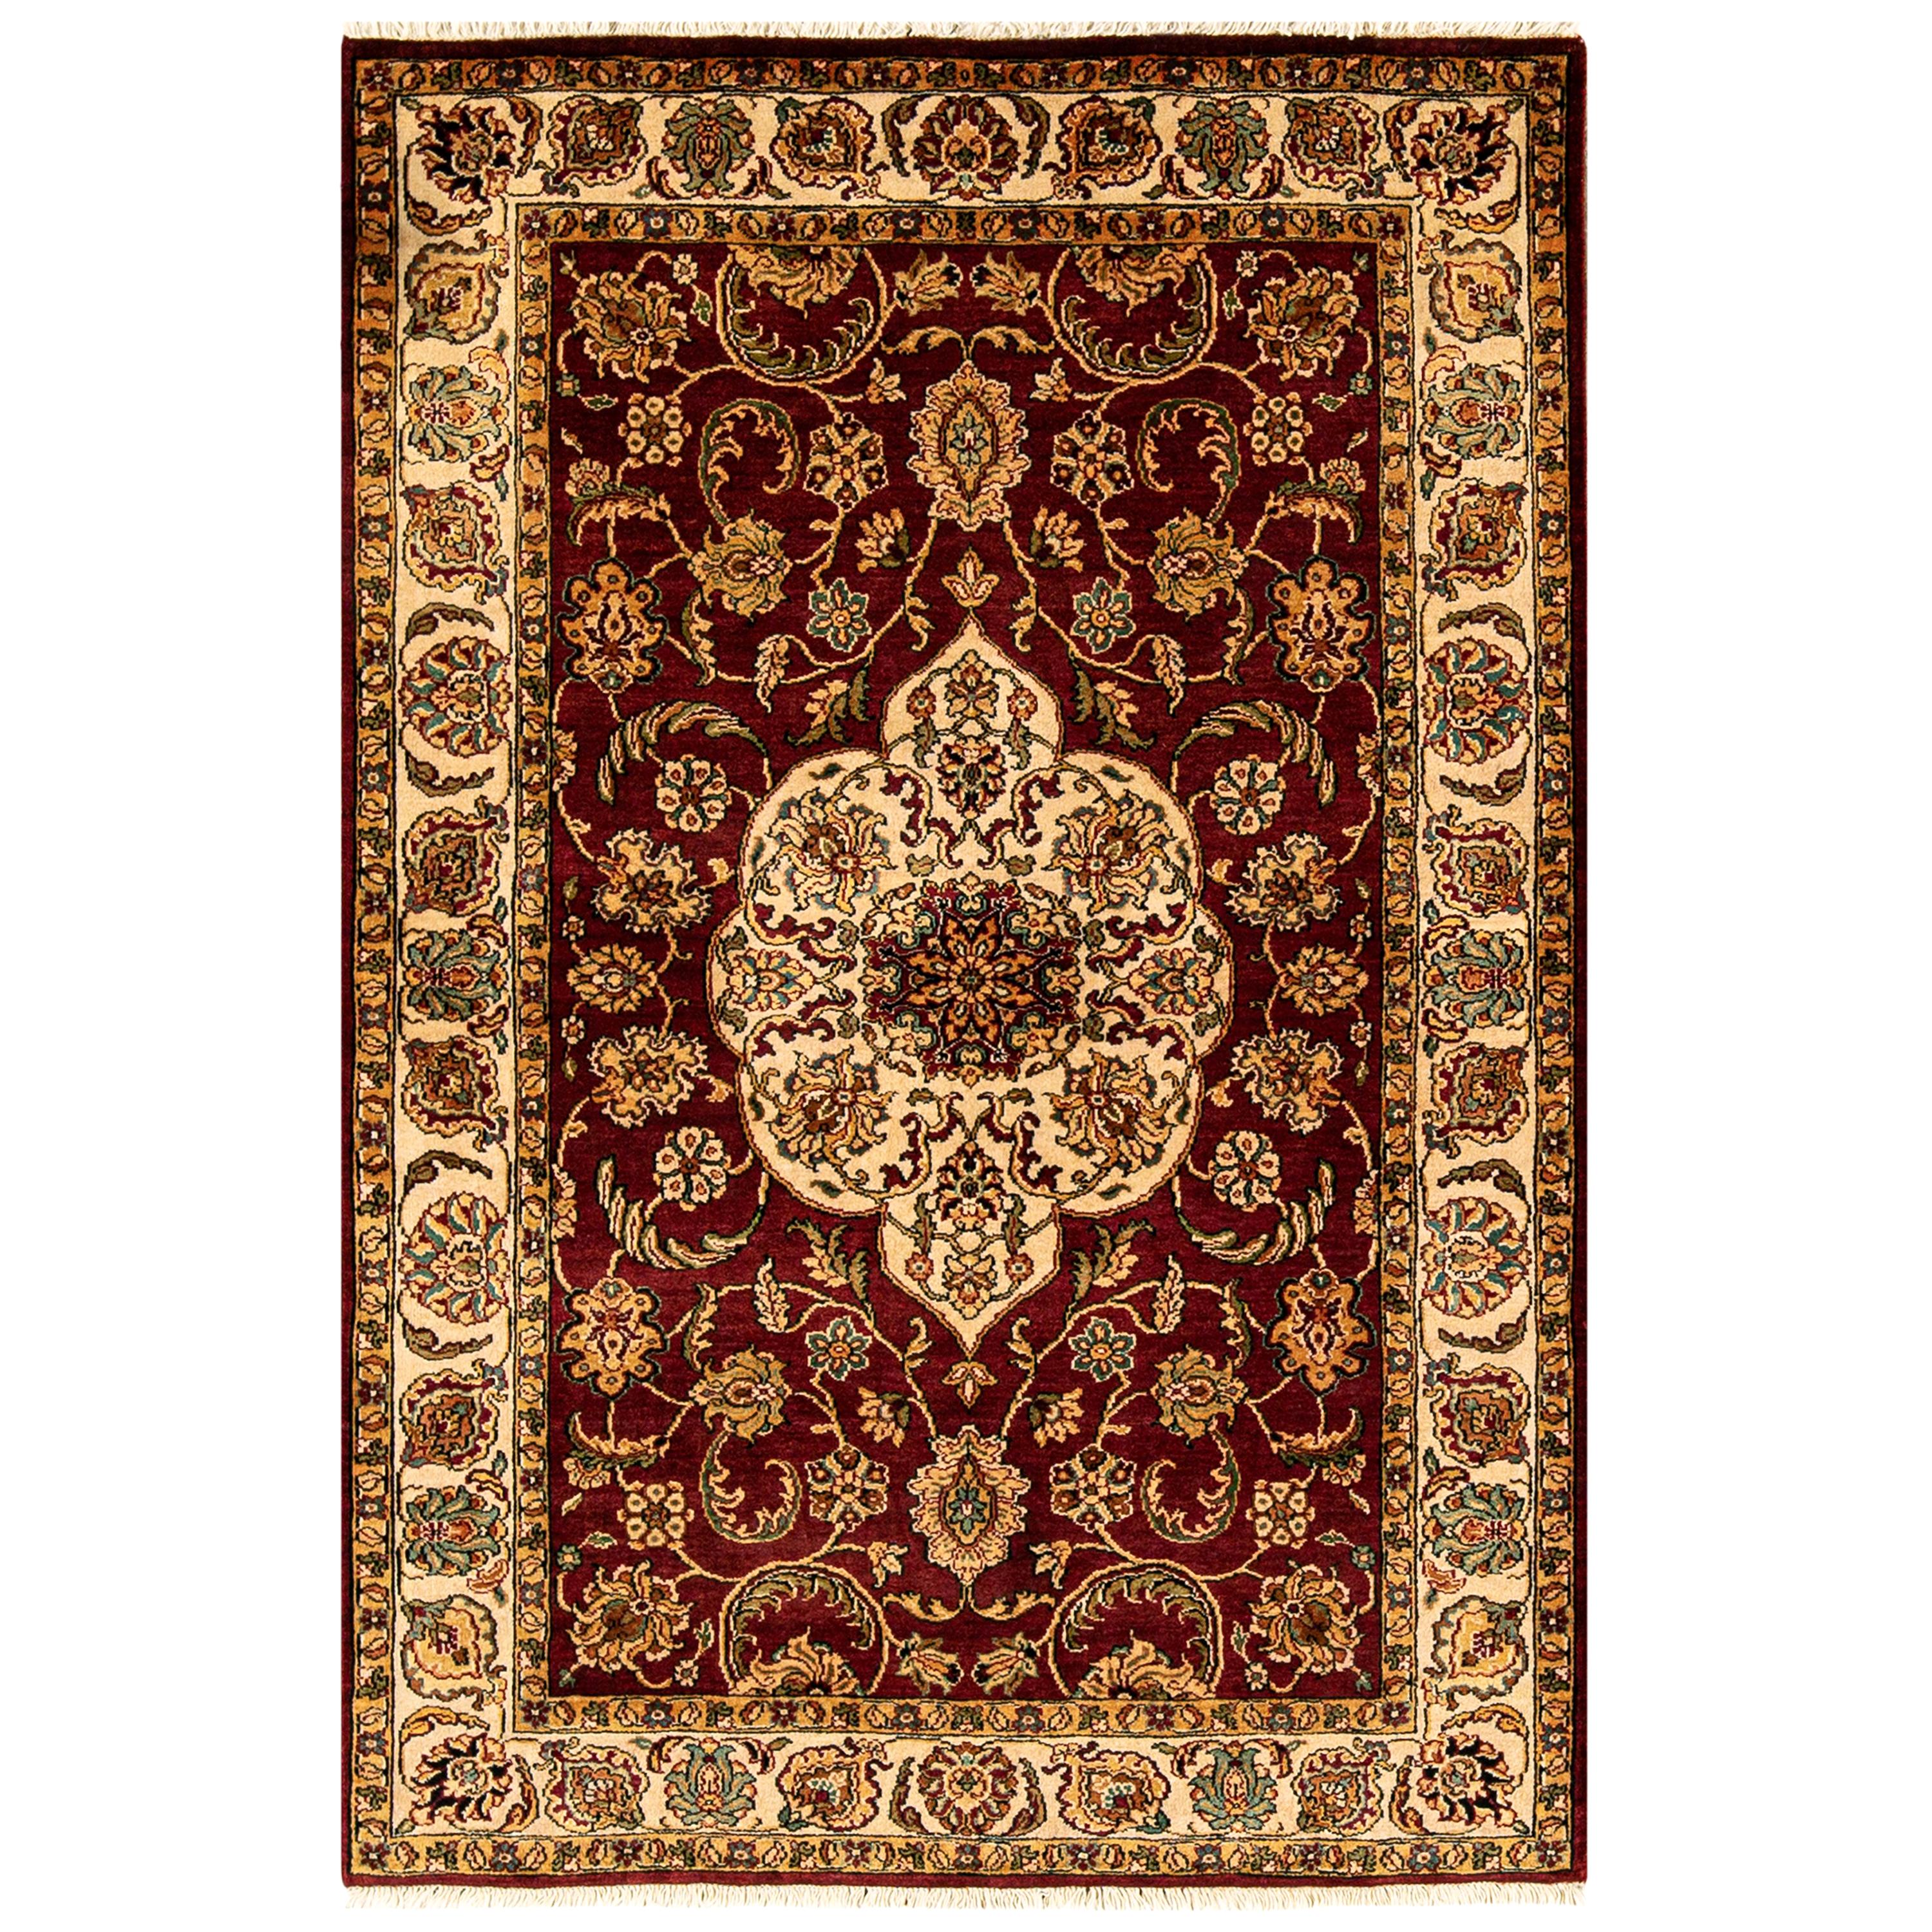  Traditional Handwoven Luxury Wool Red / Cream Area Rug 4'x5'11" For Sale